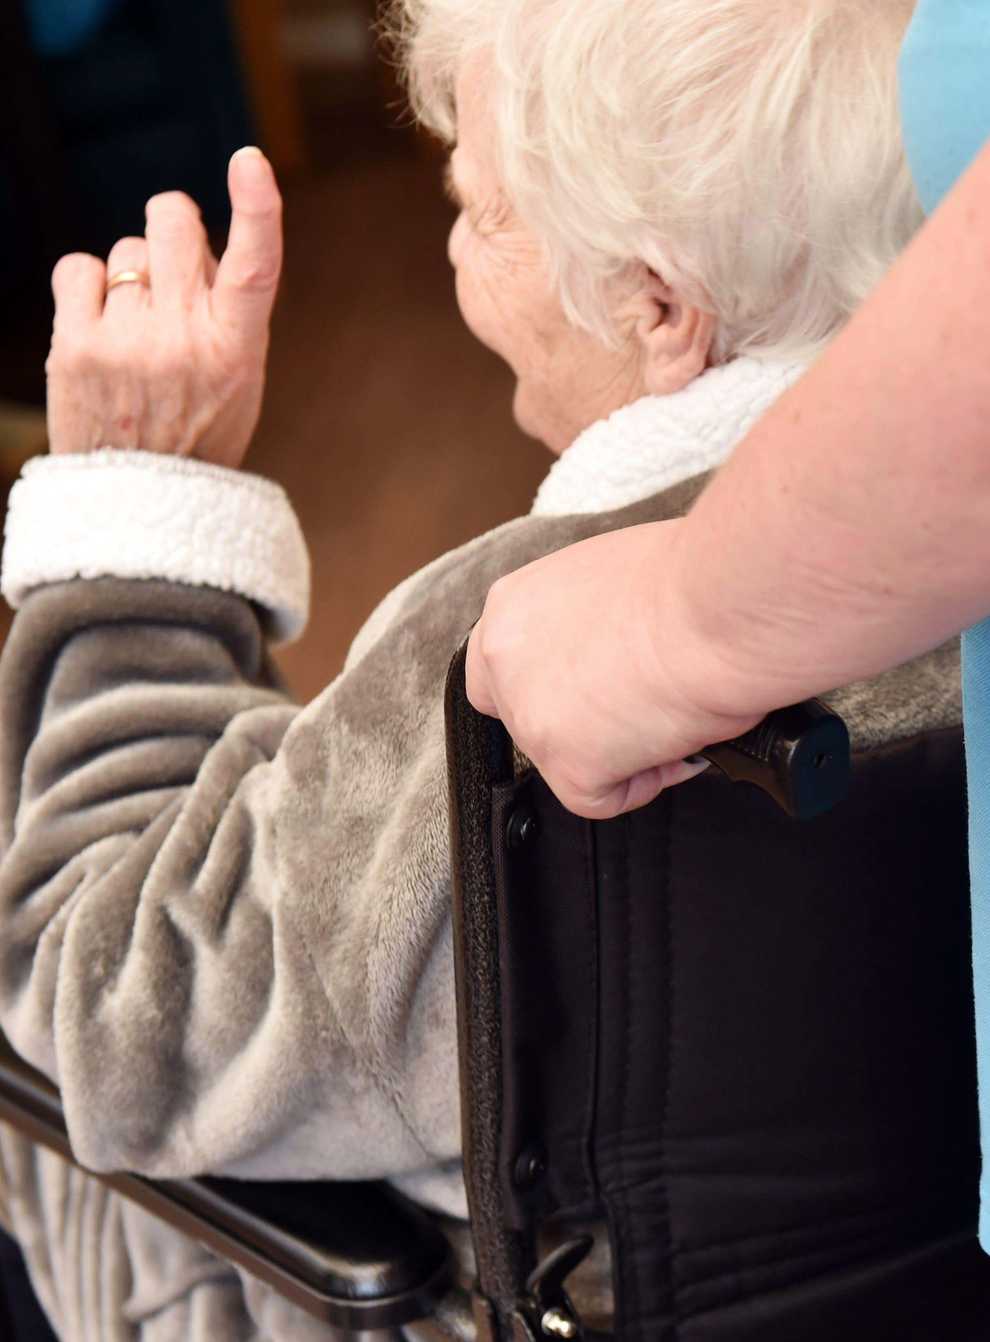 A care worker helps move an elderly person in a care home ( Paula Solloway/Alamy Stock Photo)